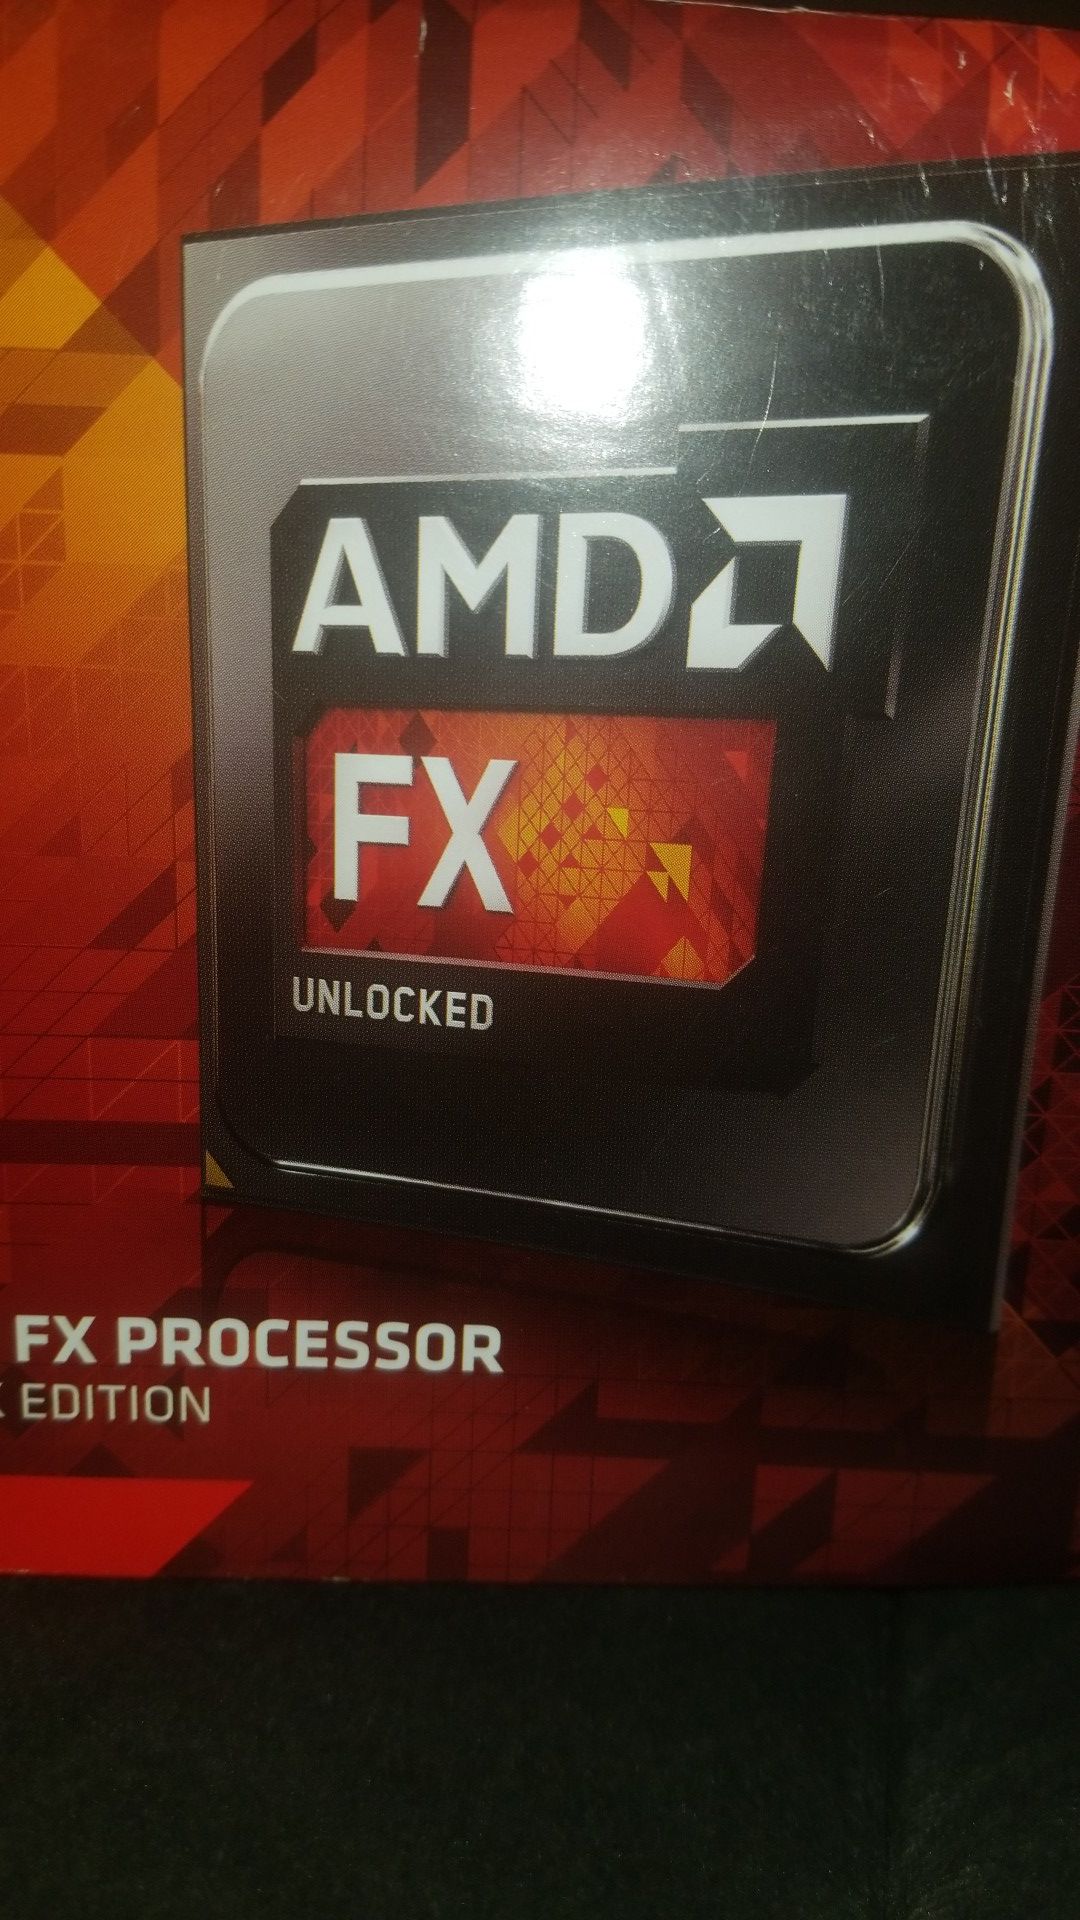 AMD FX PROCESSOR. Today only deal